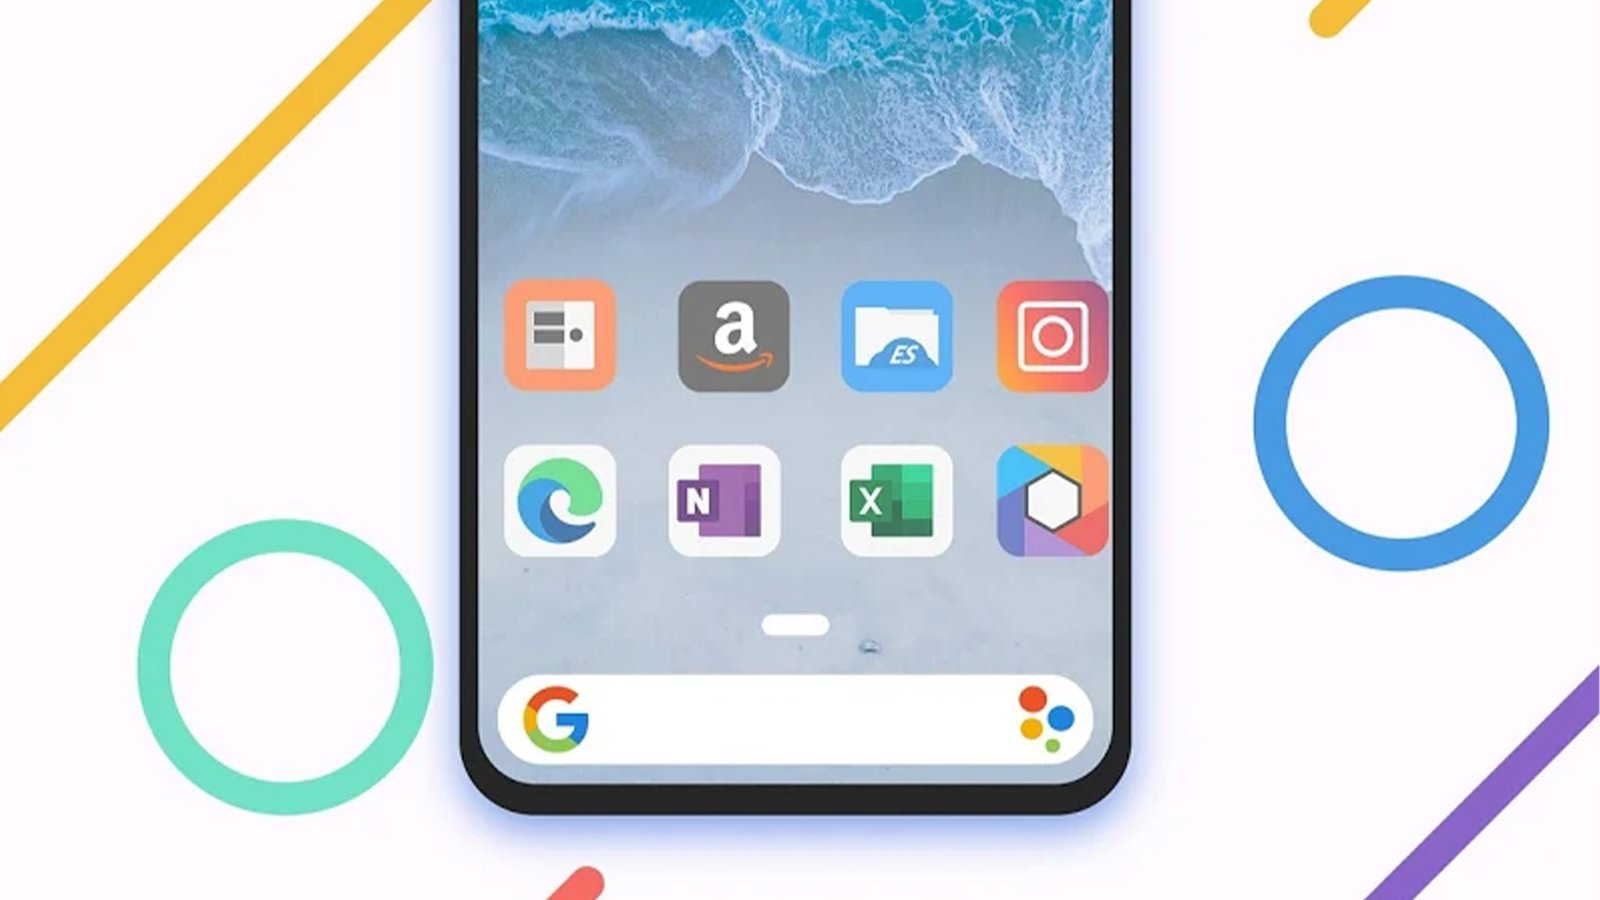 Mingo best icon packs for Android